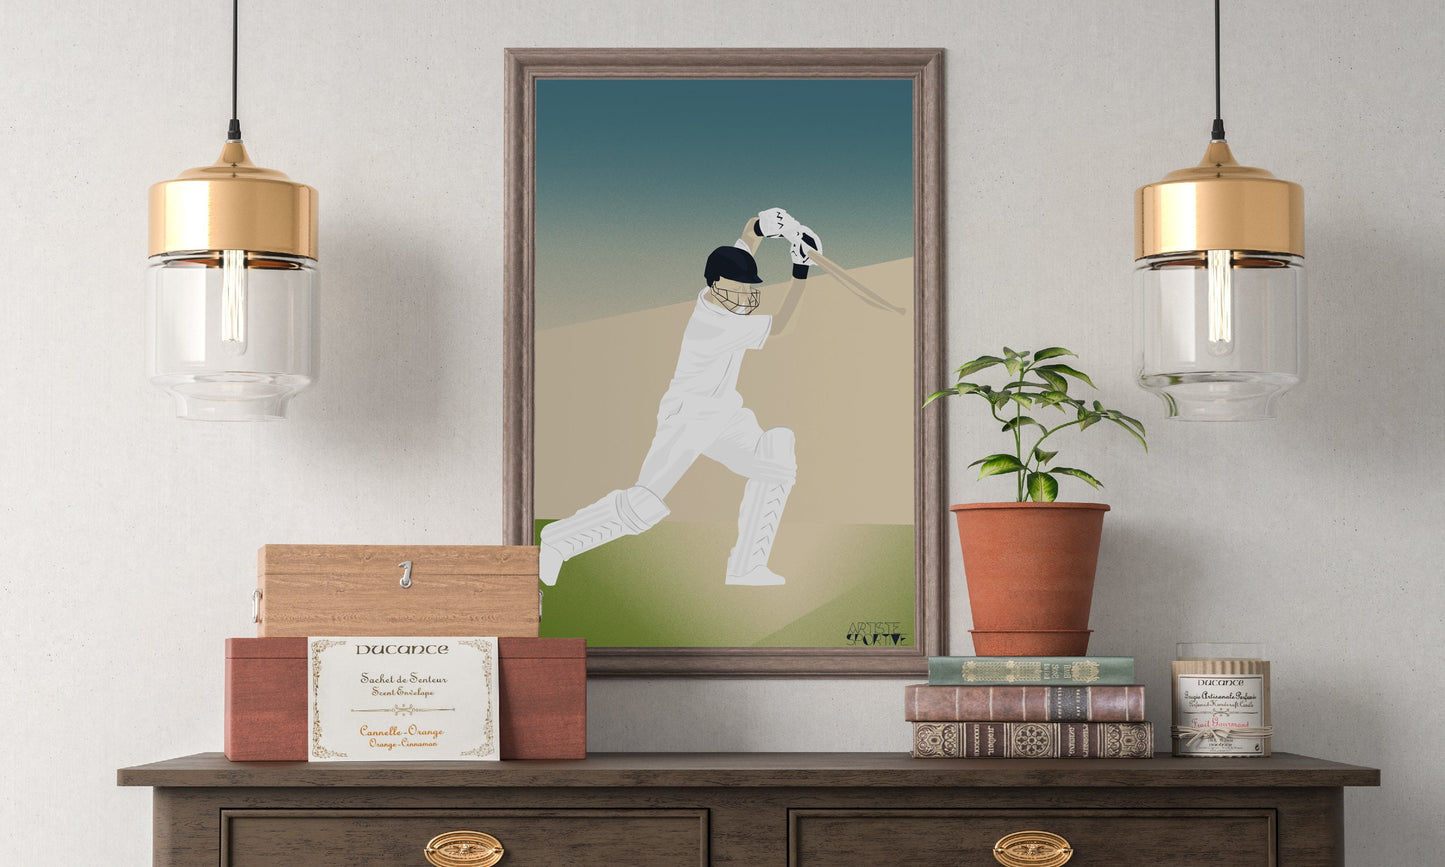 Cricket-Poster „Cover Drive“